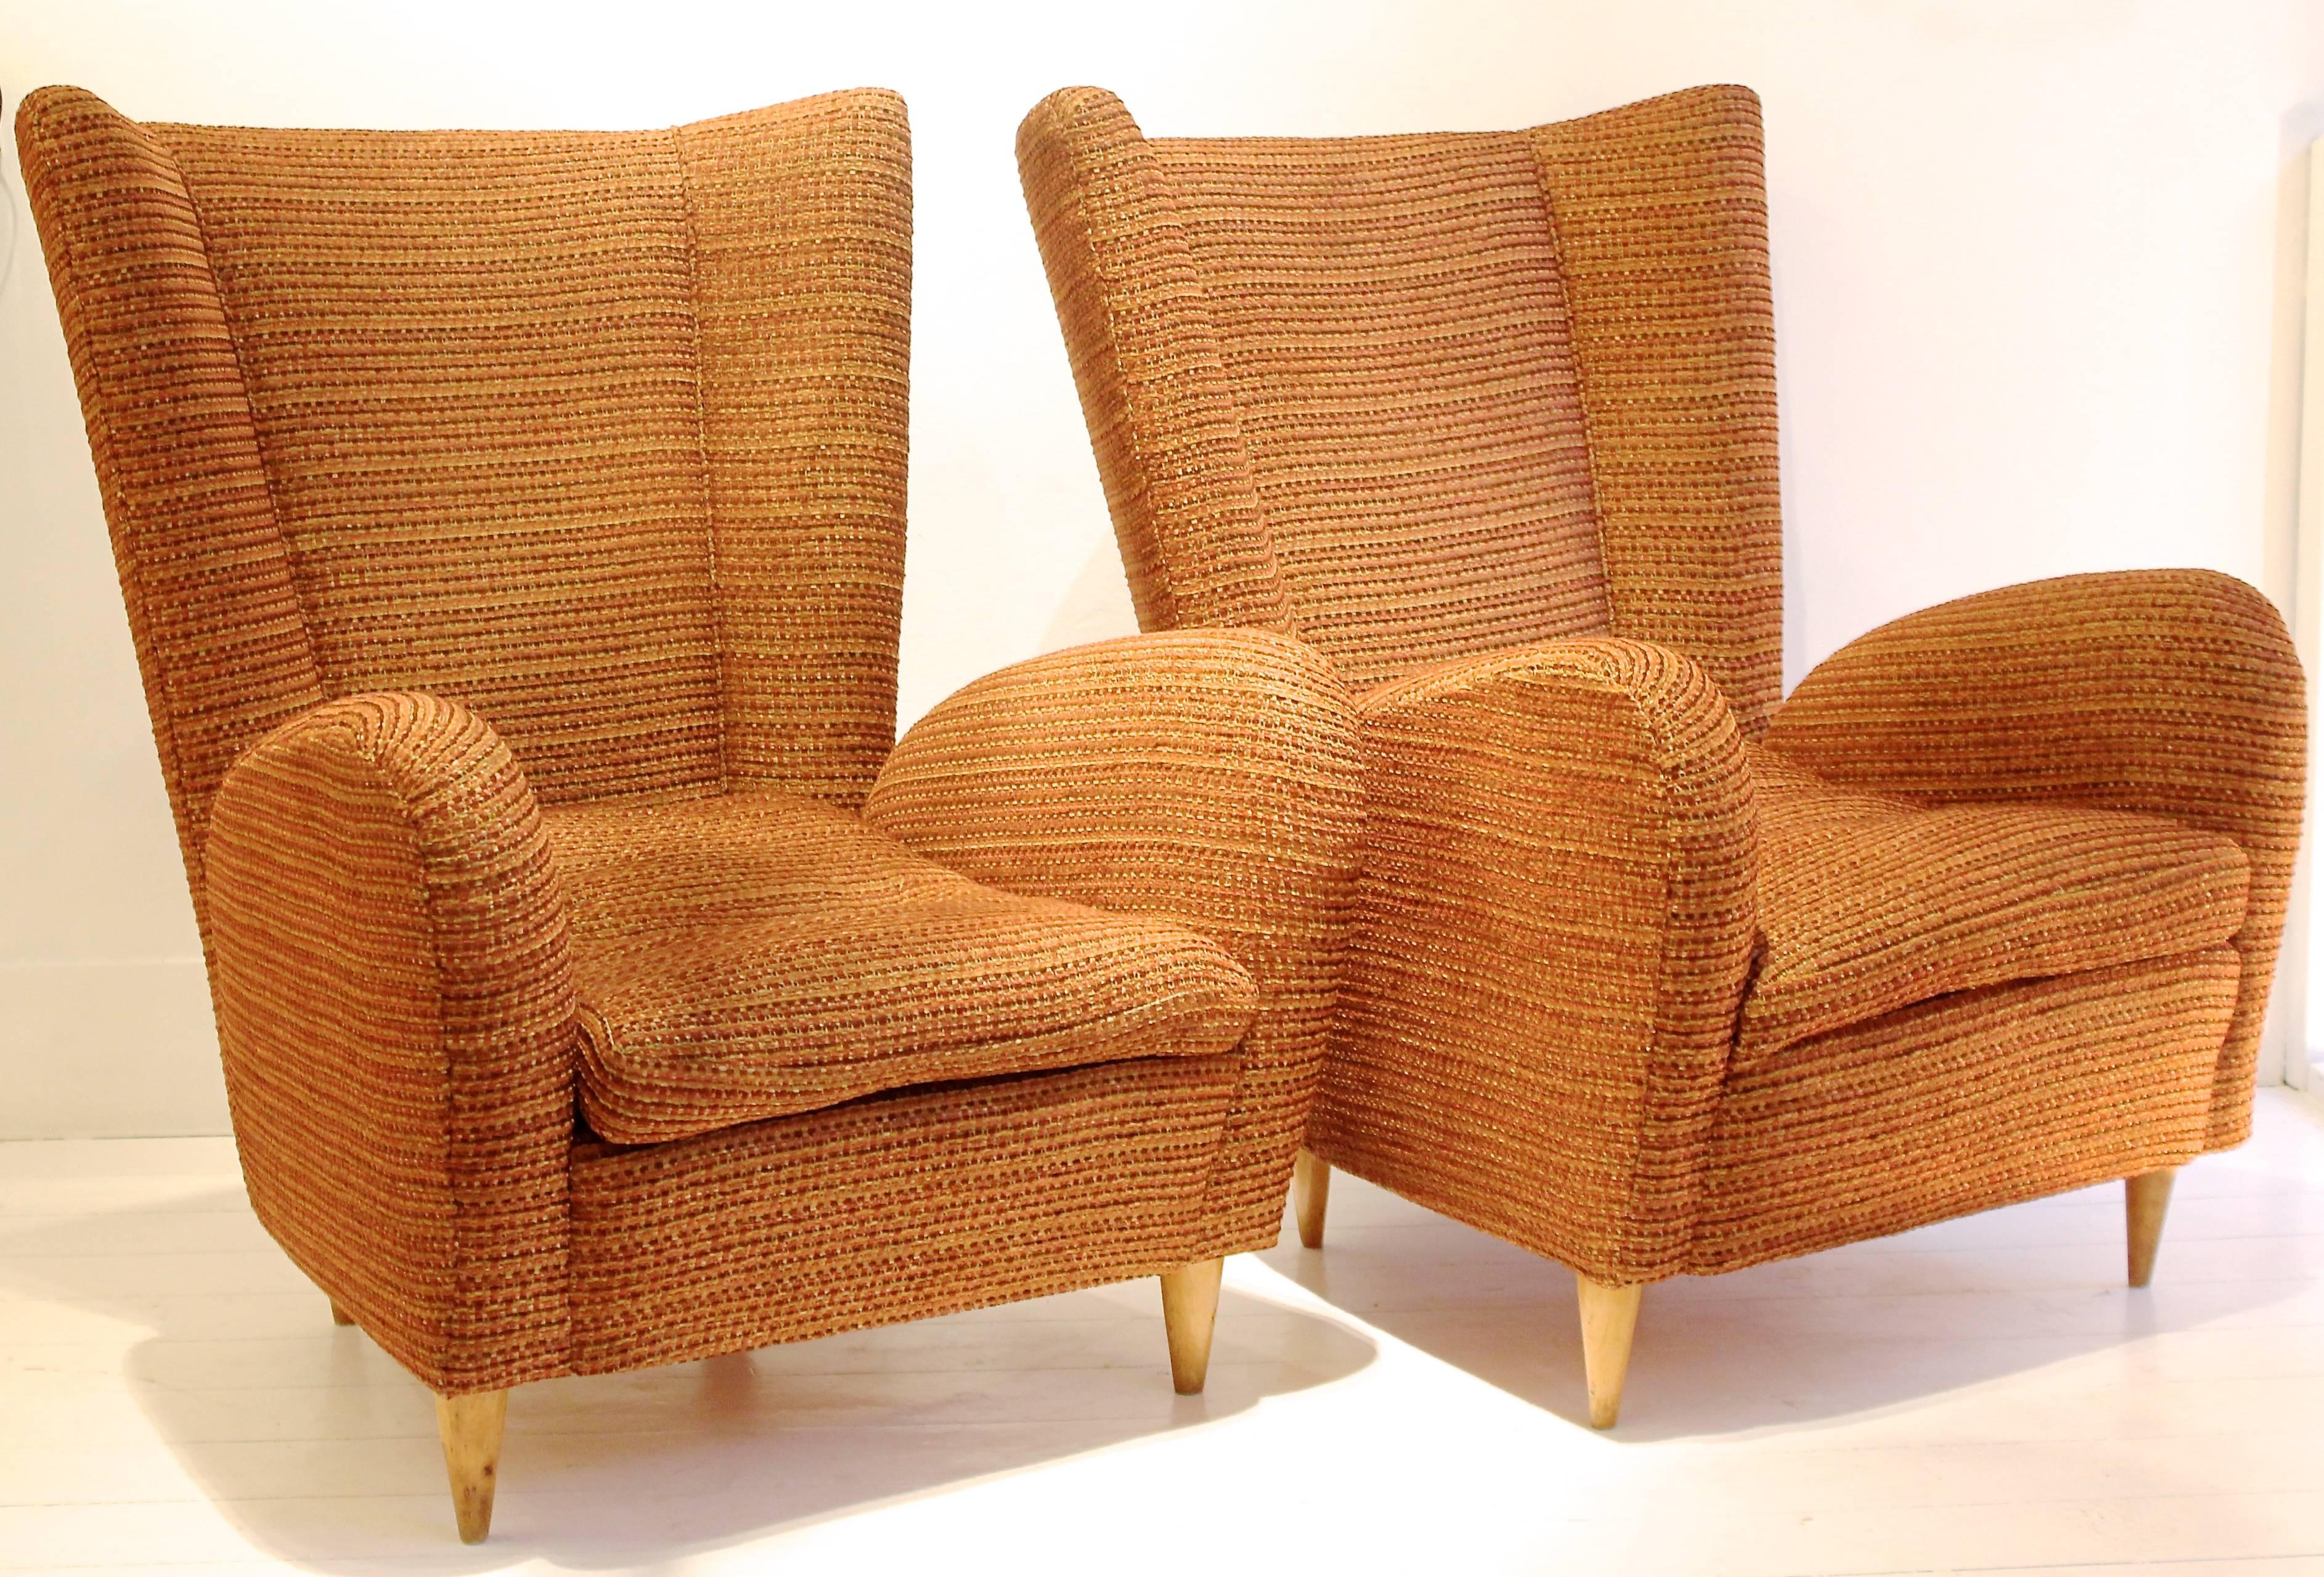 Pair of 1950s Italian armchairs attributed to designer Paolo Buffa, new upholstery using Robert Allen design fabric.